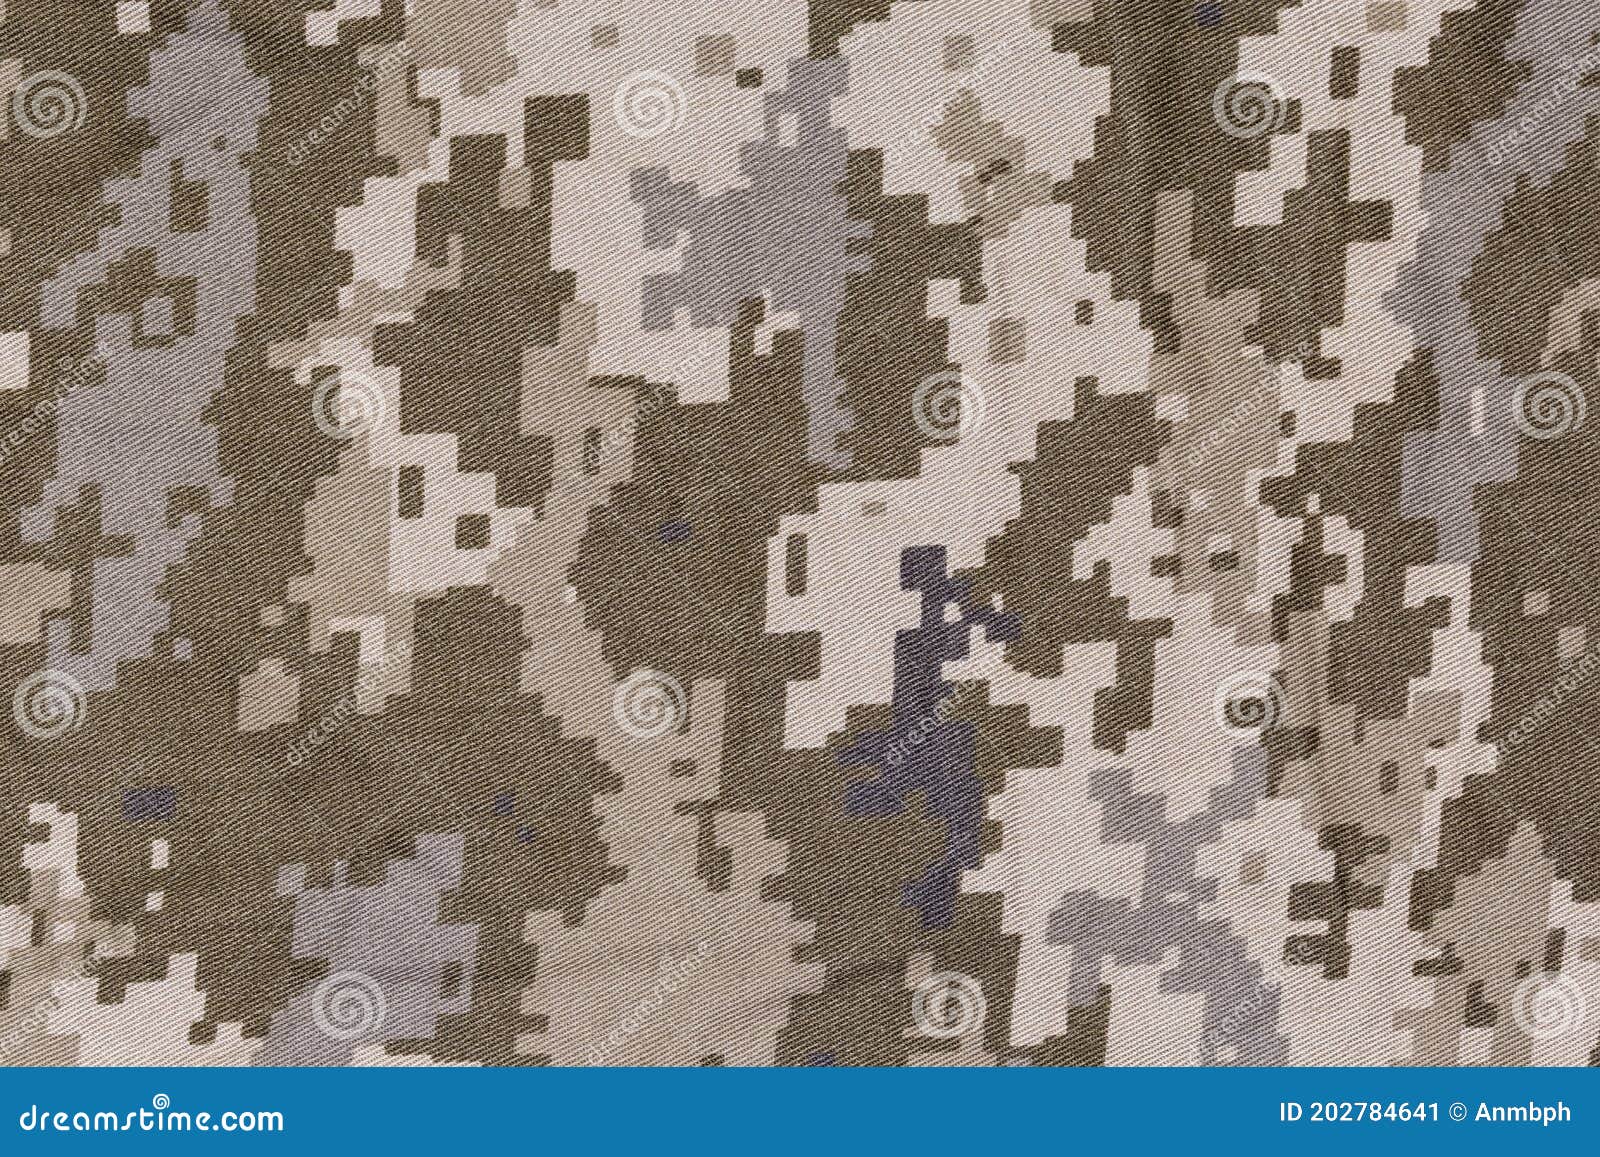 slightly crumpled fabric with digital camouflage pattern close-up, background